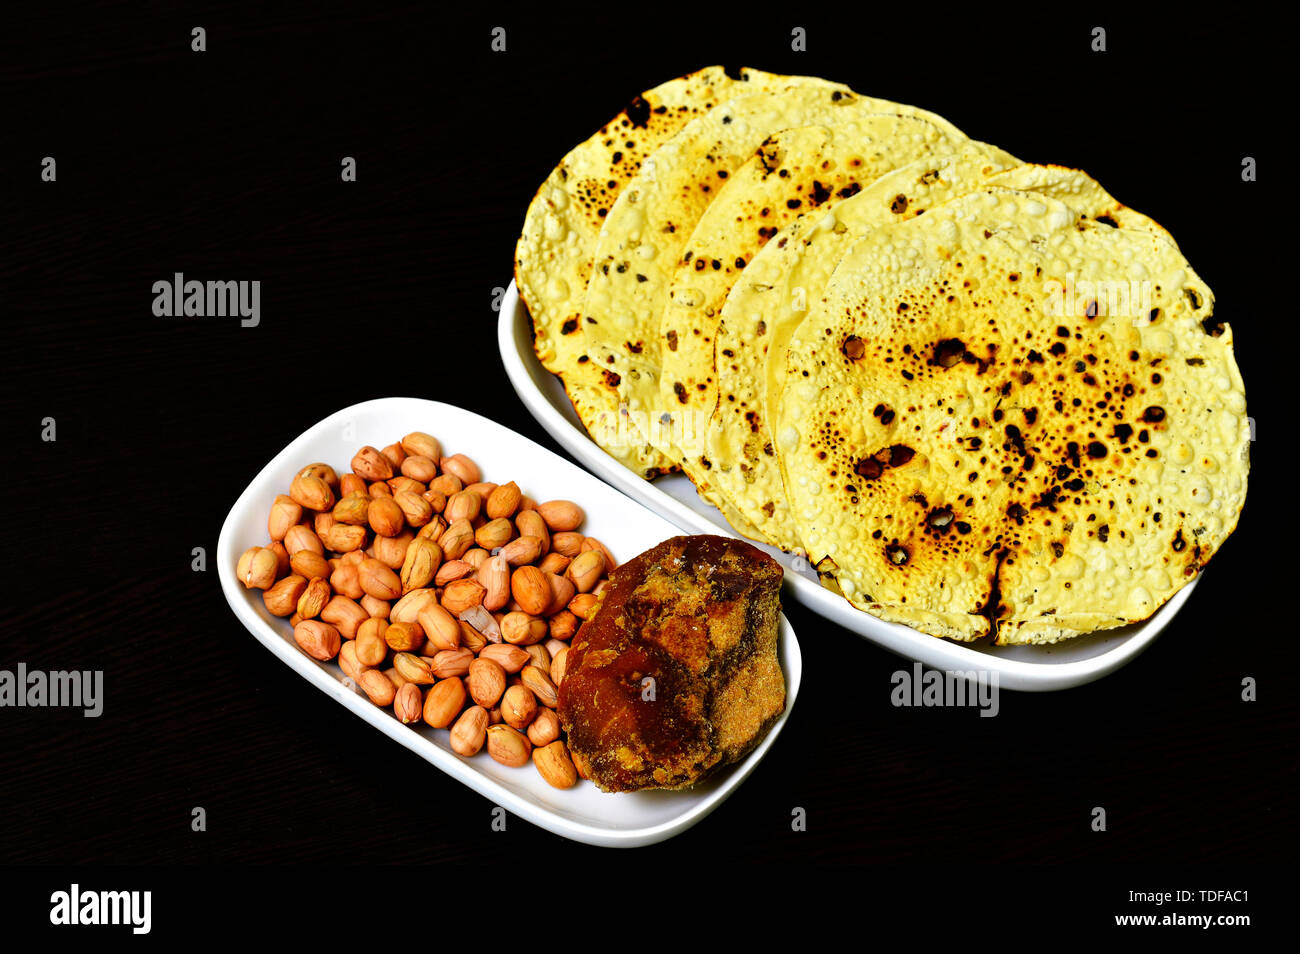 Roasted papad an Indian snack with whole peanuts and jaggery in a plate. Stock Photo